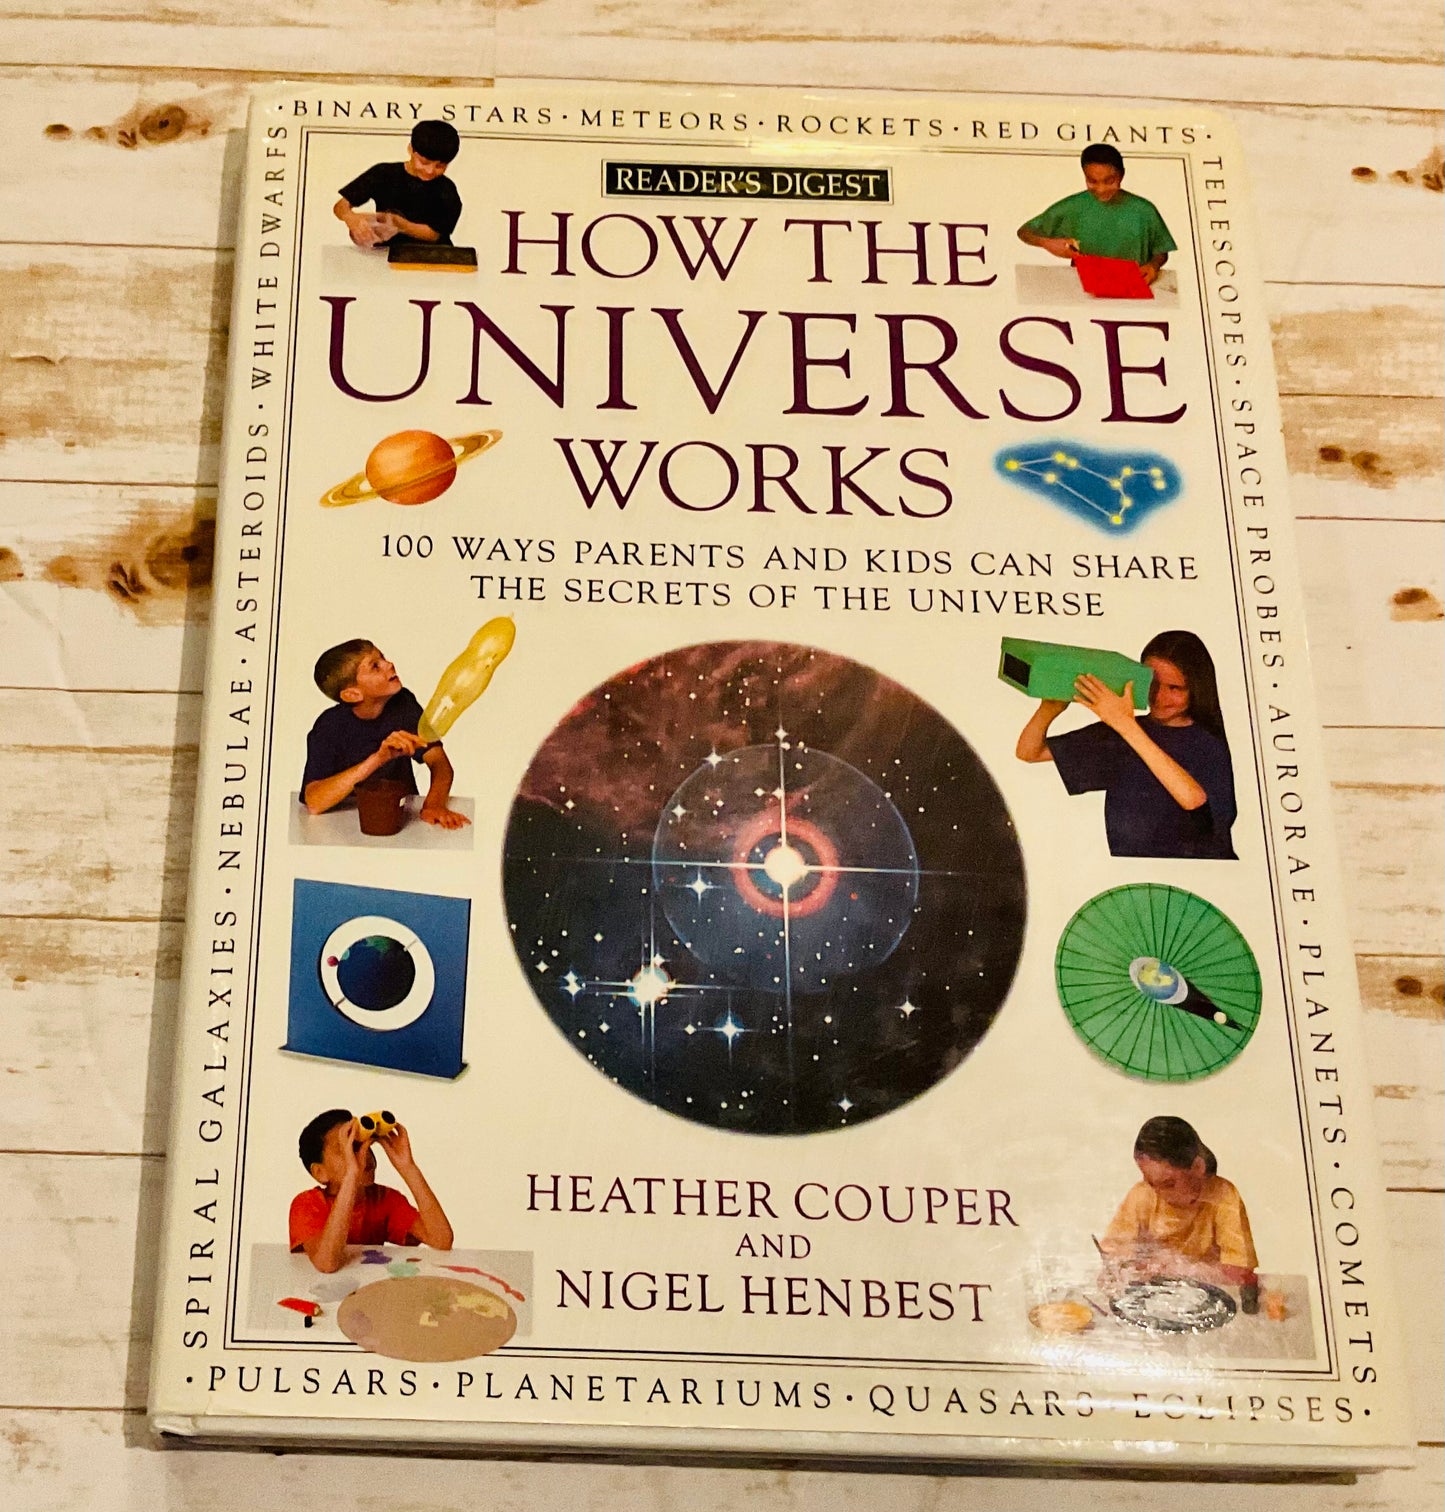 How the Universe Works: 100 Ways Parents and Kids Can Share the Secrets of the Universe - Anchored Homeschool Resource Center